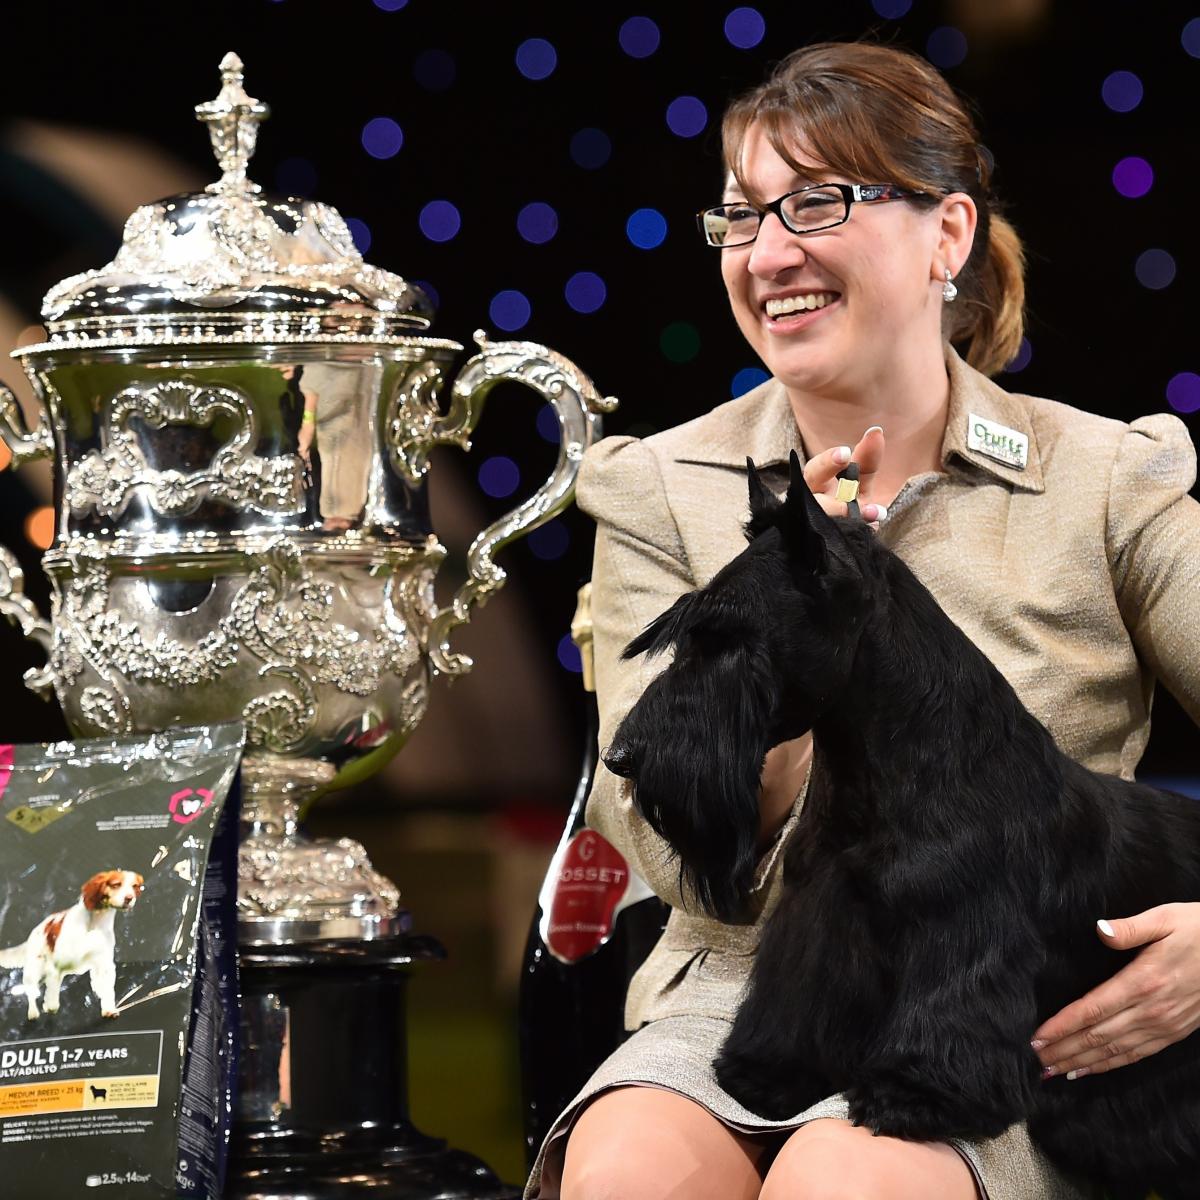 Crufts 2016 Dog Show Dates, Times, Live Stream, TV Schedule and